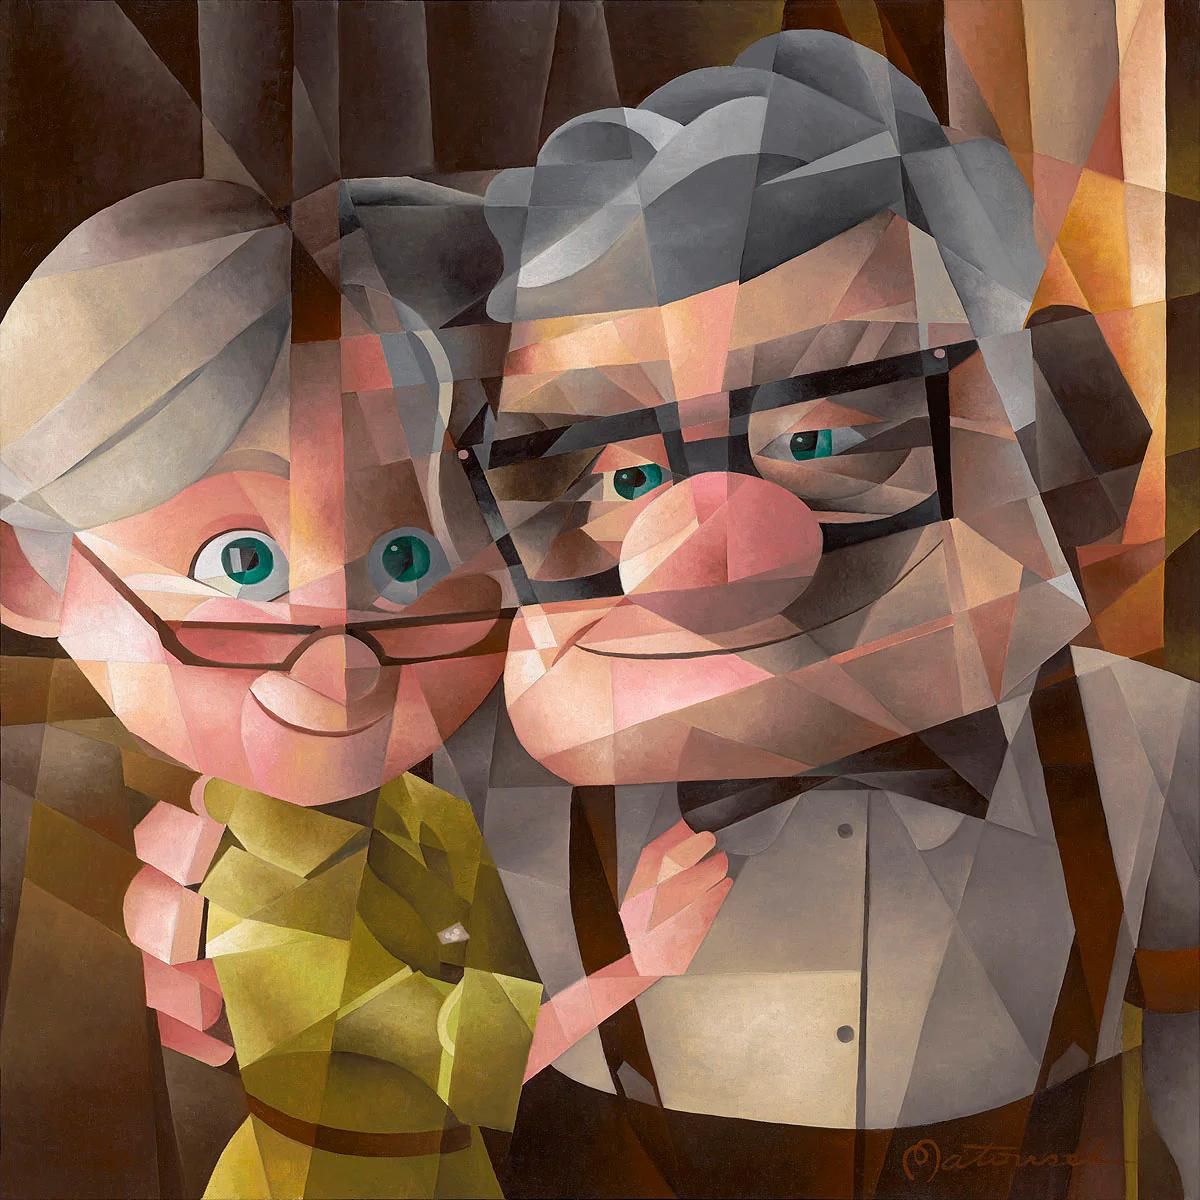 Carl and Ellie in - "Up". 